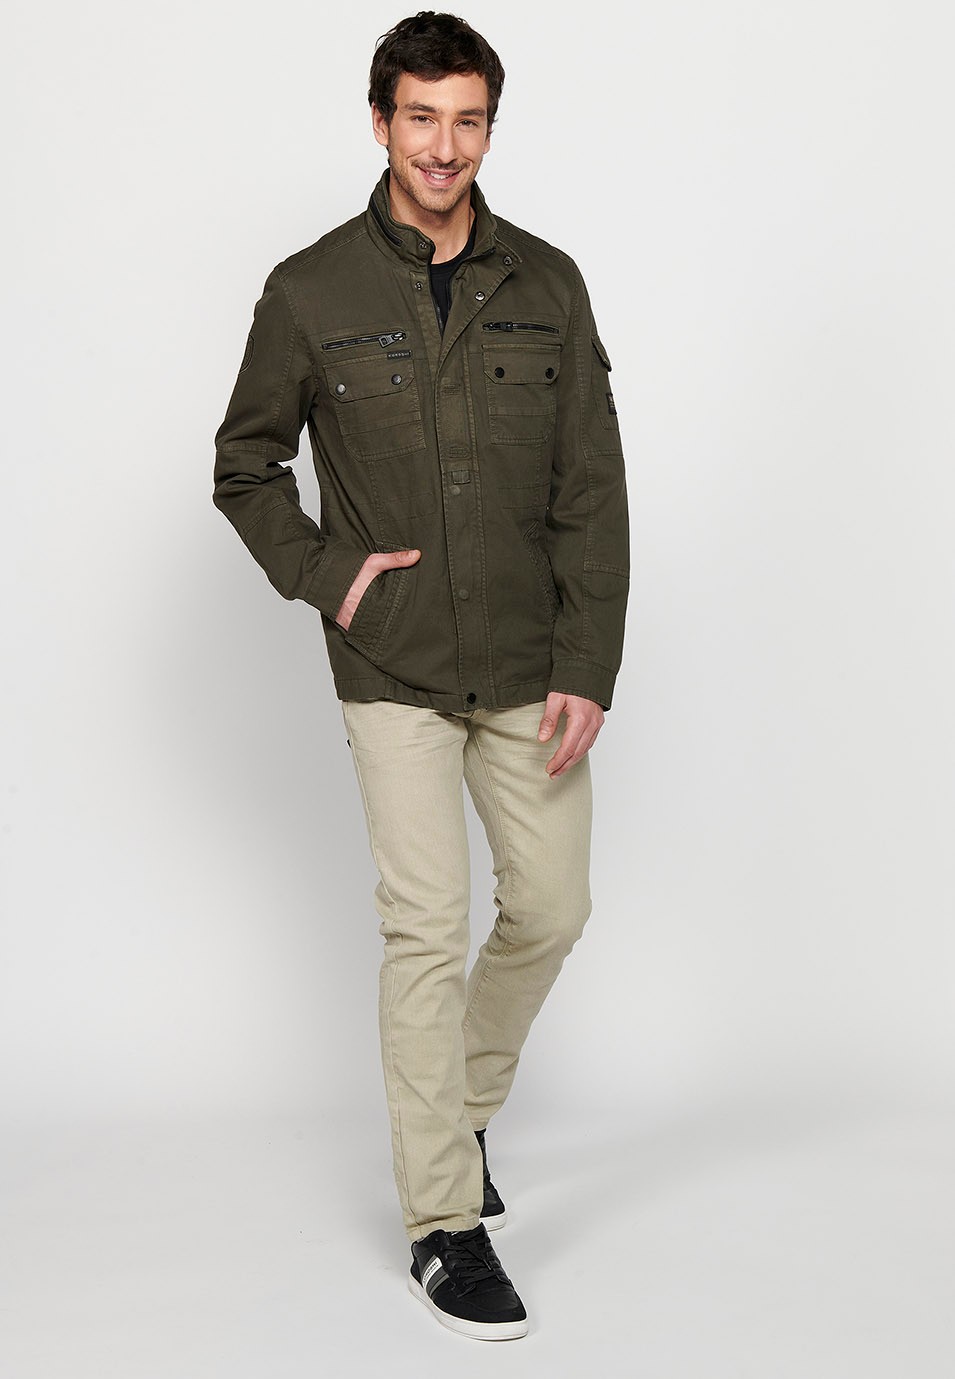 Long Jacket with Zipper Front Closure and Lapel with Stand Collar and Flap Pockets in Olive Color for Men 2